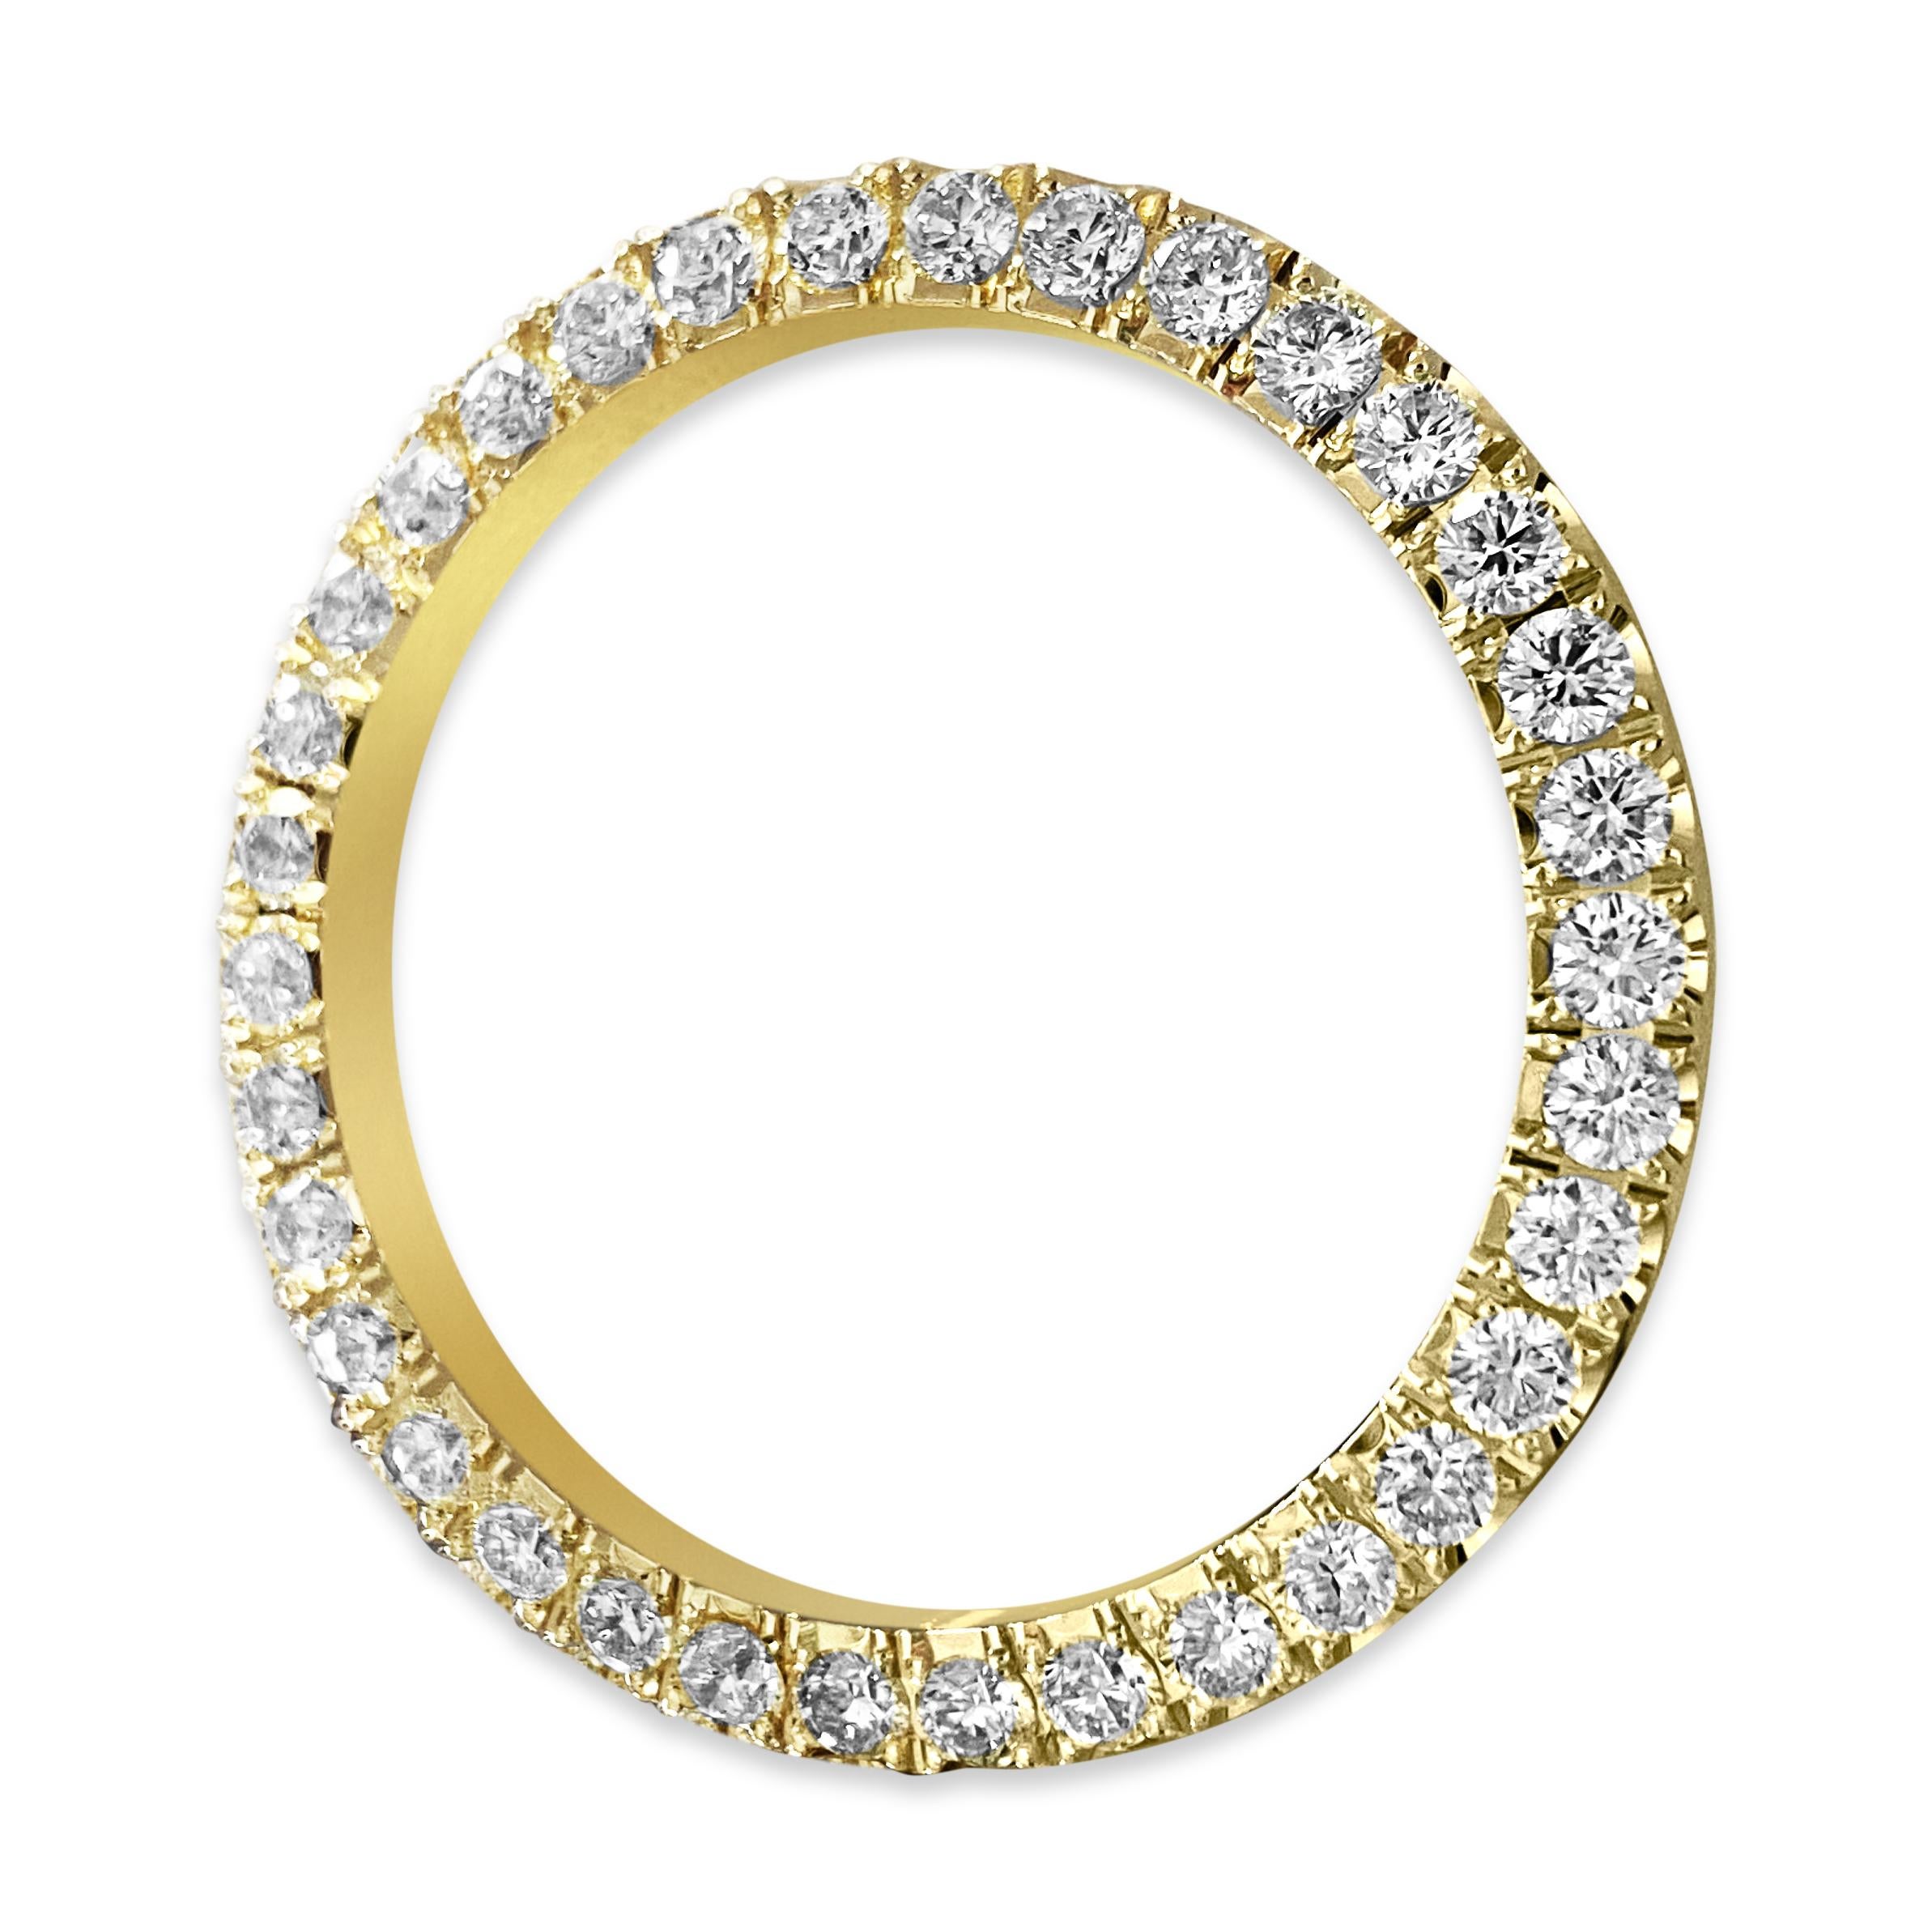 14k yellow gold 
36mm diamond bezel
Carat weigh total: 4.50 carats
Clarity: VVS
Round brilliant cut
U shape setting
100% natural earth mined diamond. 
Custom made diamond bezel for 36mm watches 

Can perfectly set in 36mm Rolex datejust and